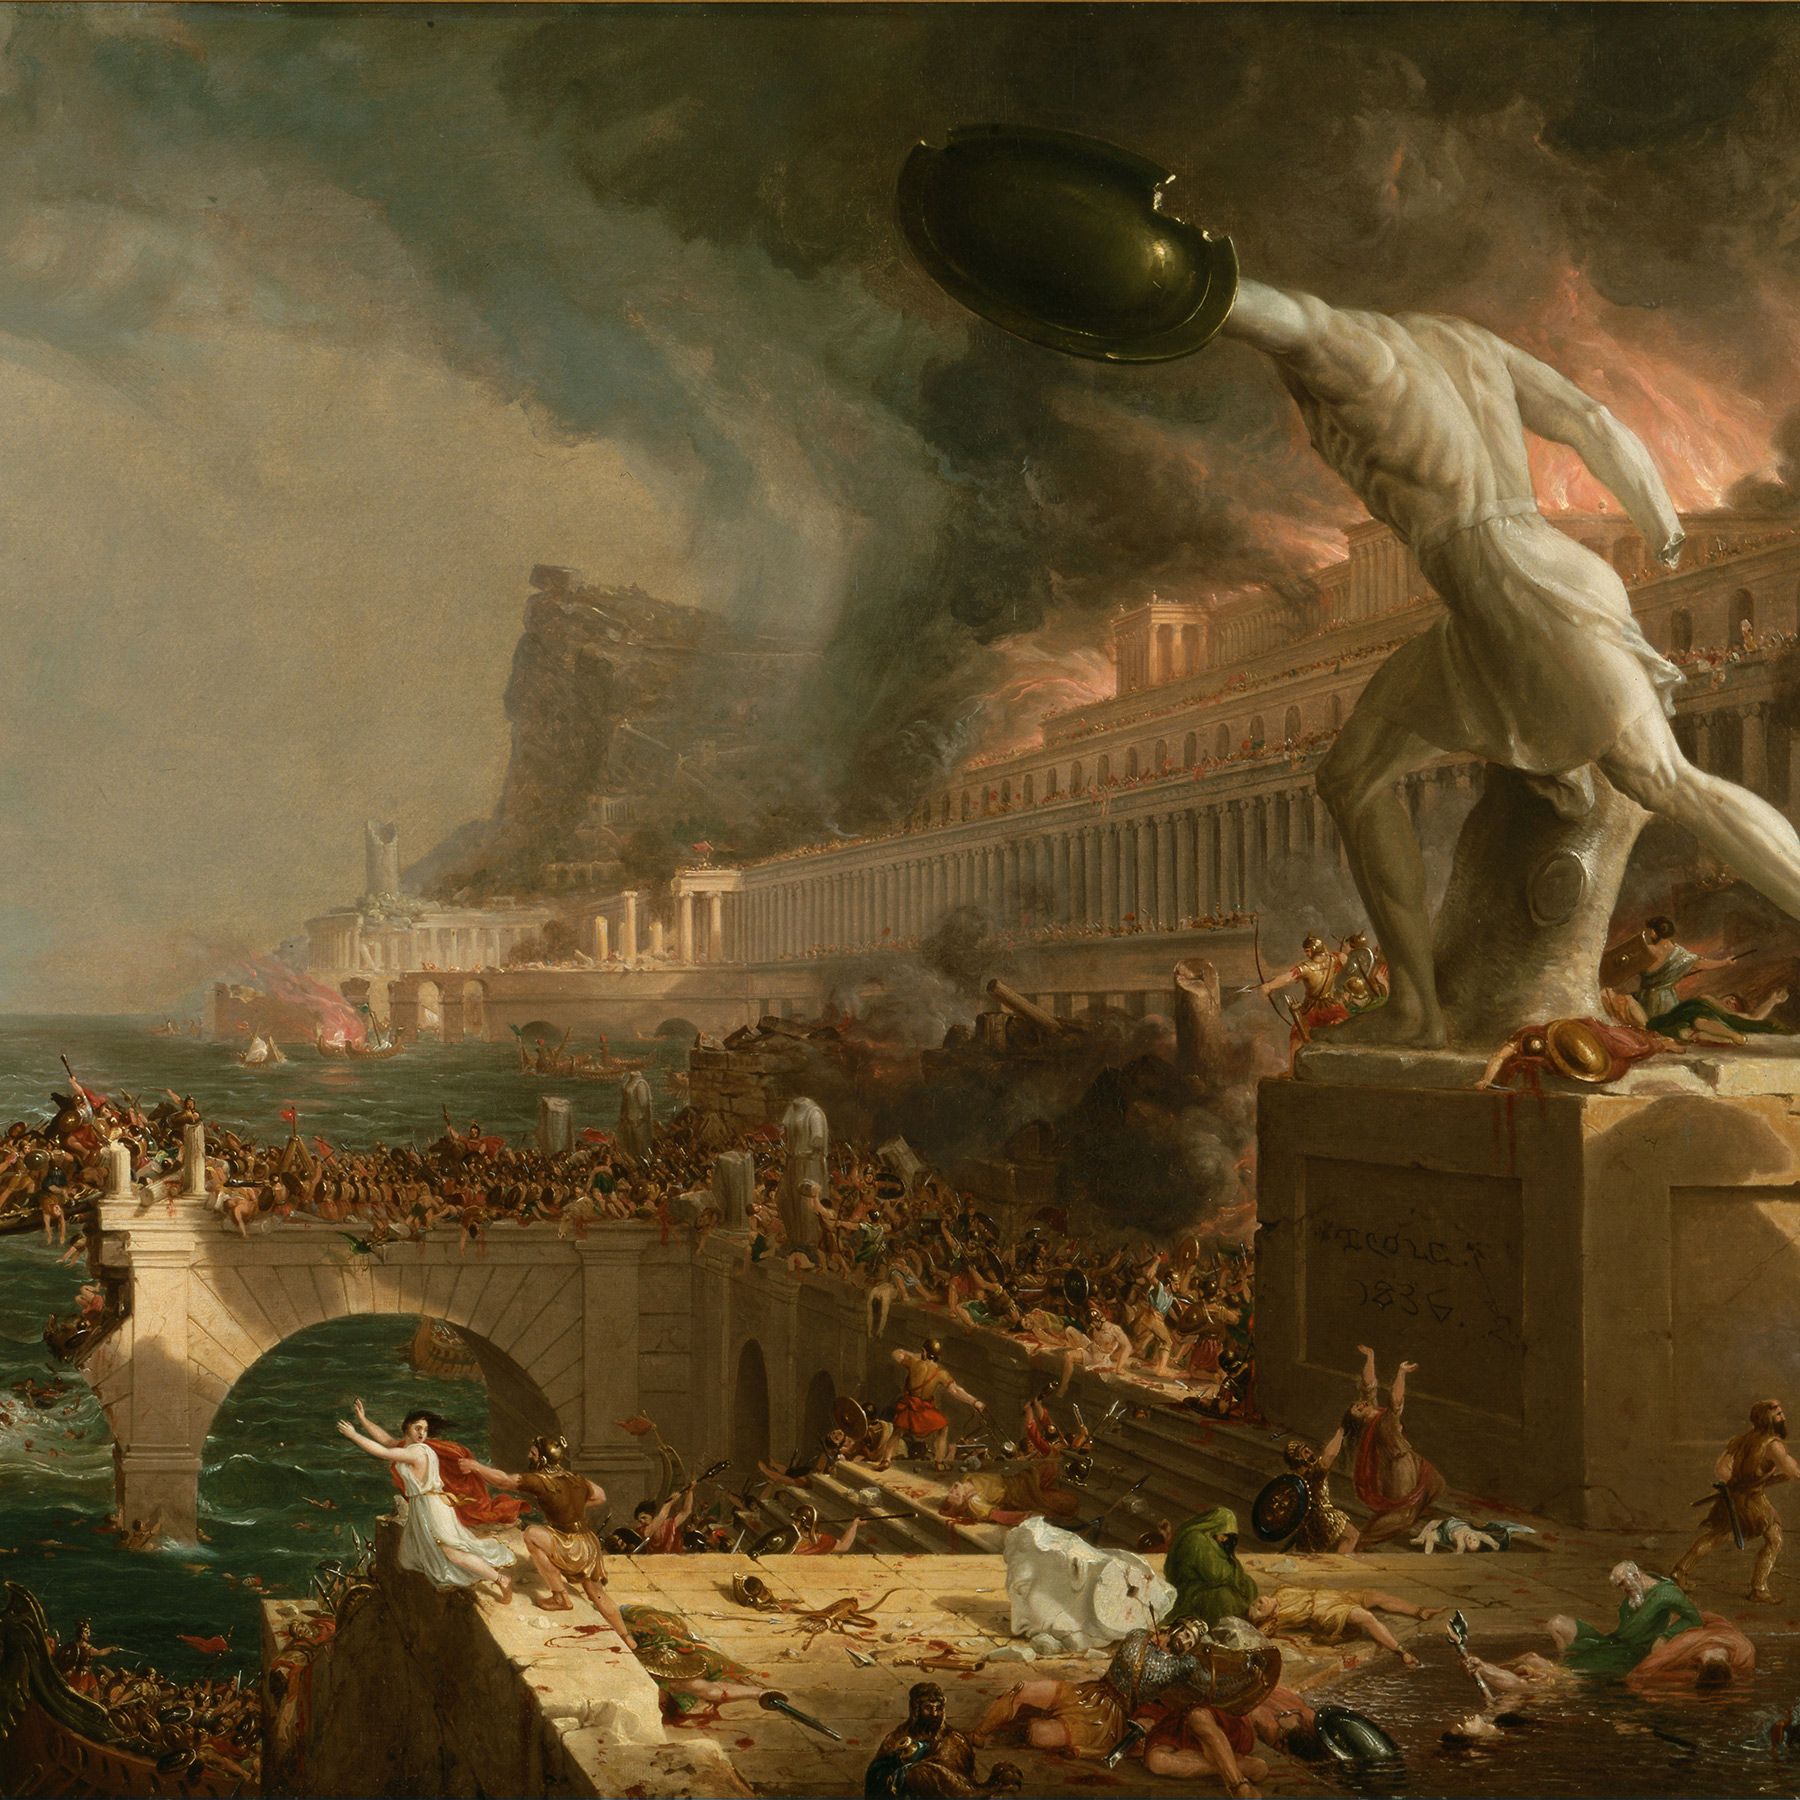 How the ancient philosophers imagined the end of the world